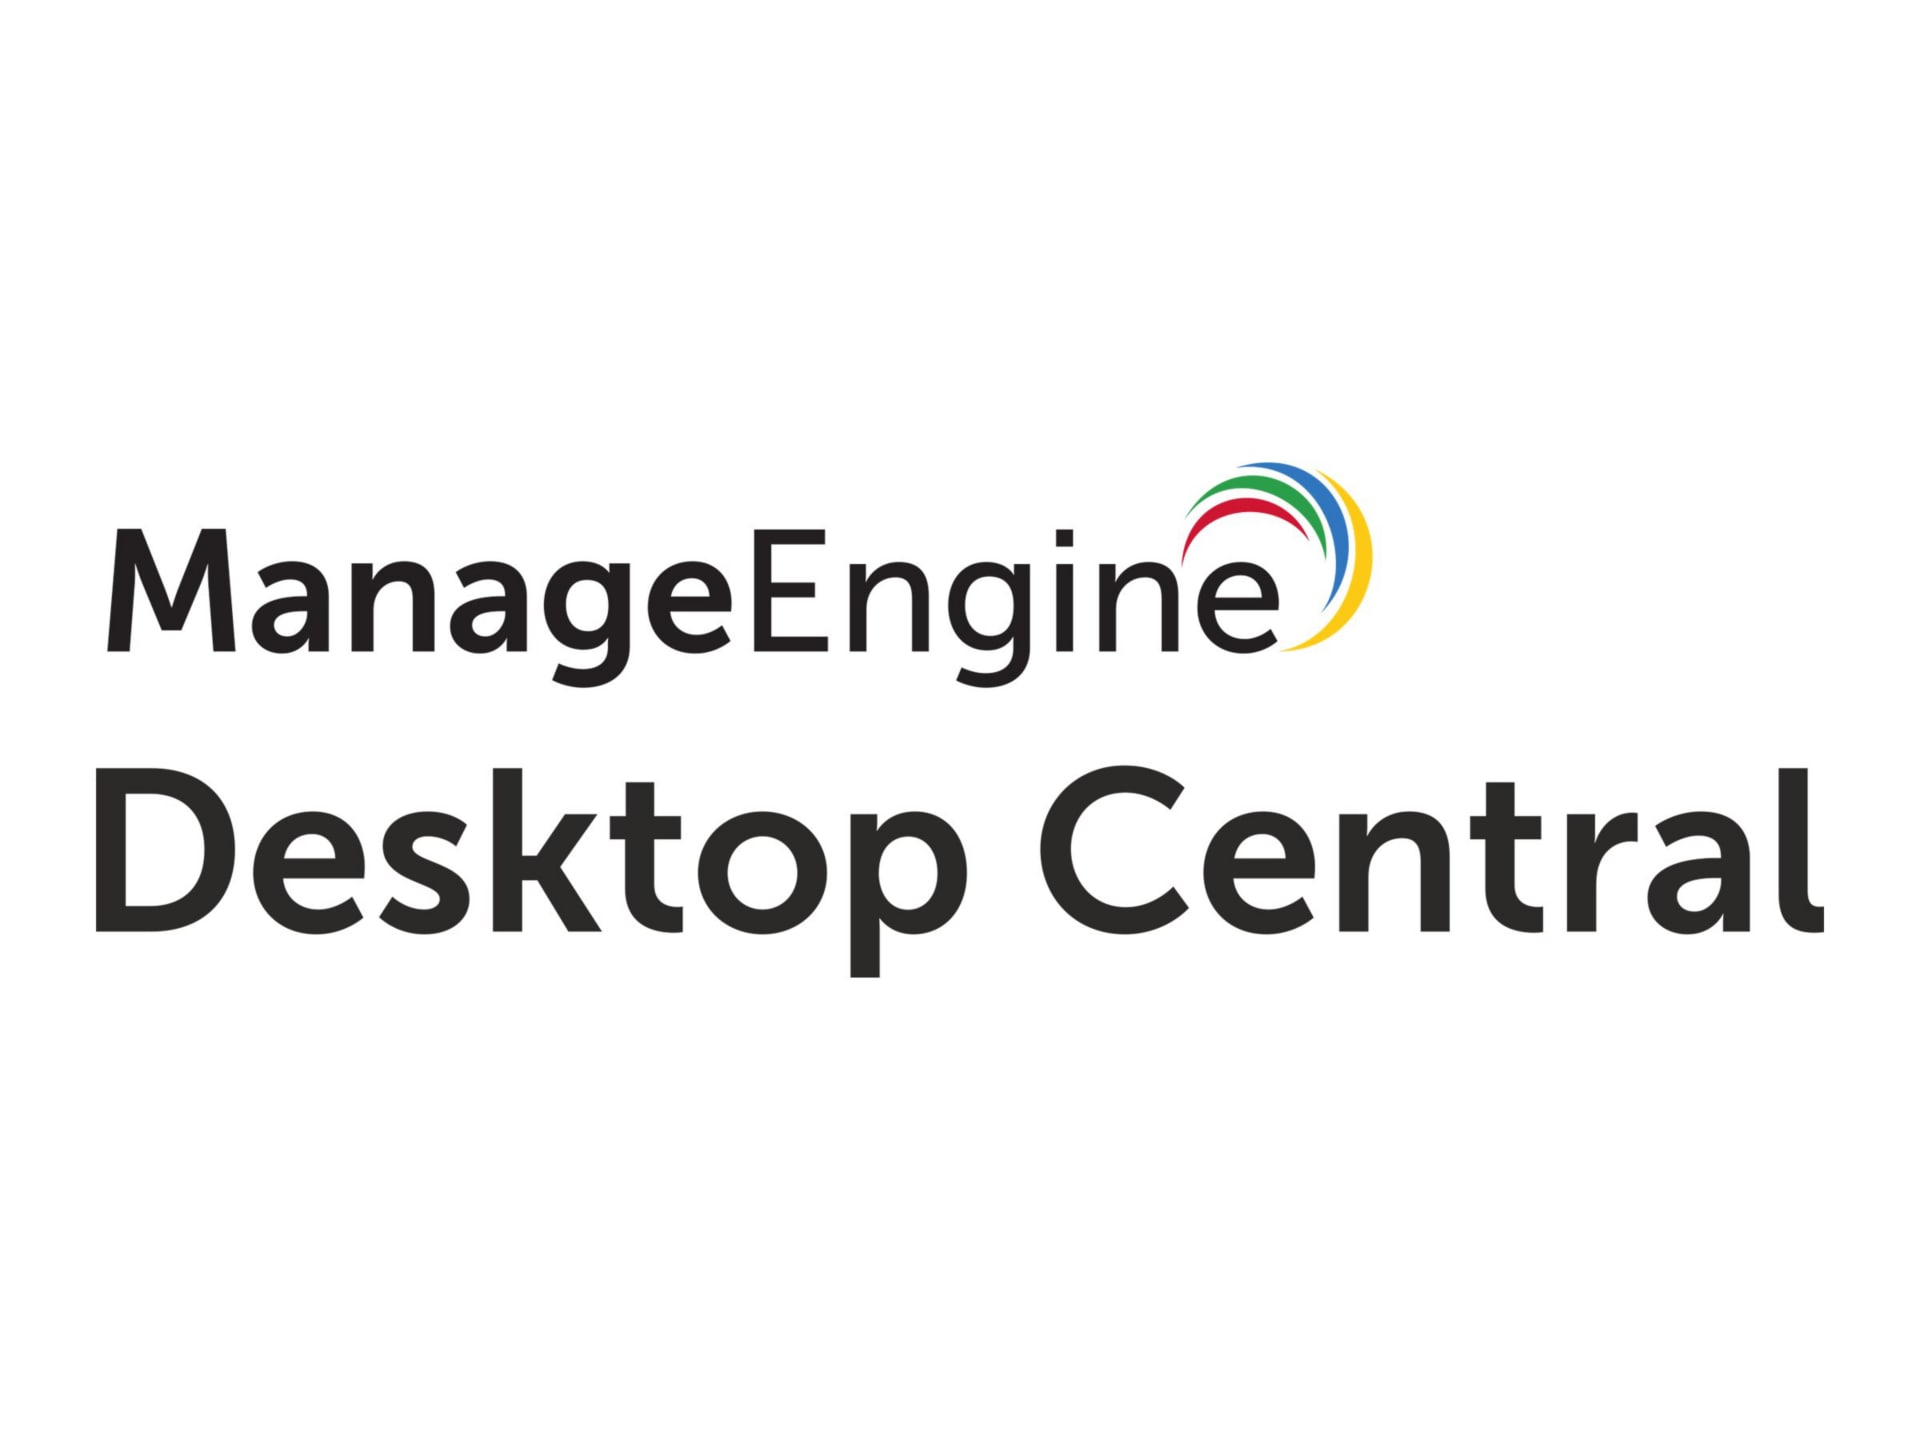 ManageEngine Desktop Central Cloud Add-on - subscription license (1 year) -